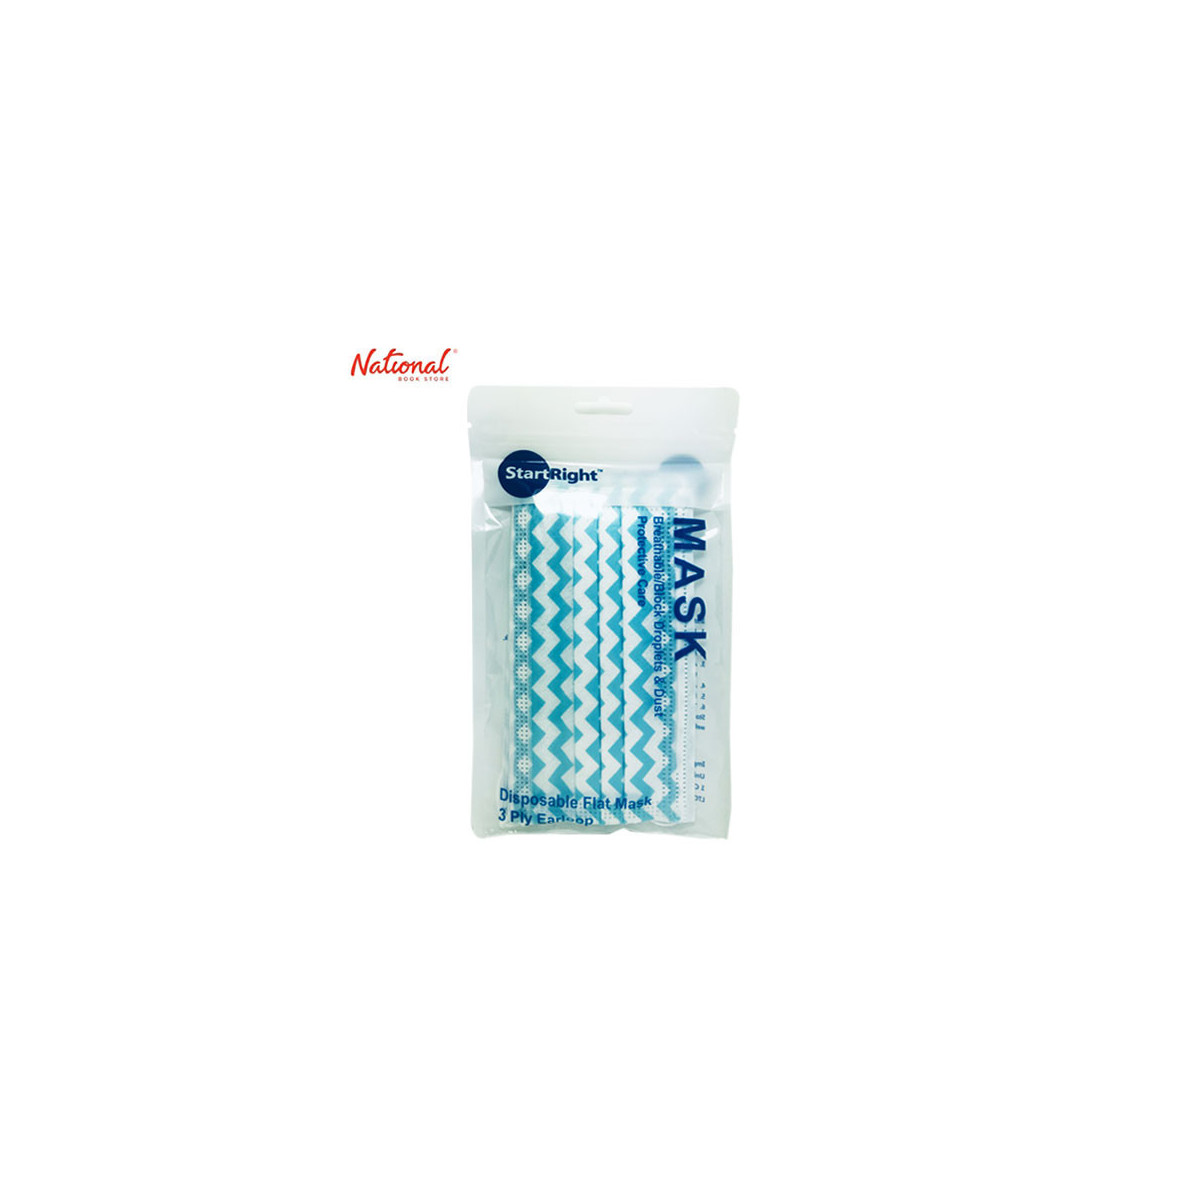 START RIGHT FACE MASK ADULT 3-PLY SURGICAL 5S/PACK ZIGZAG BLUE